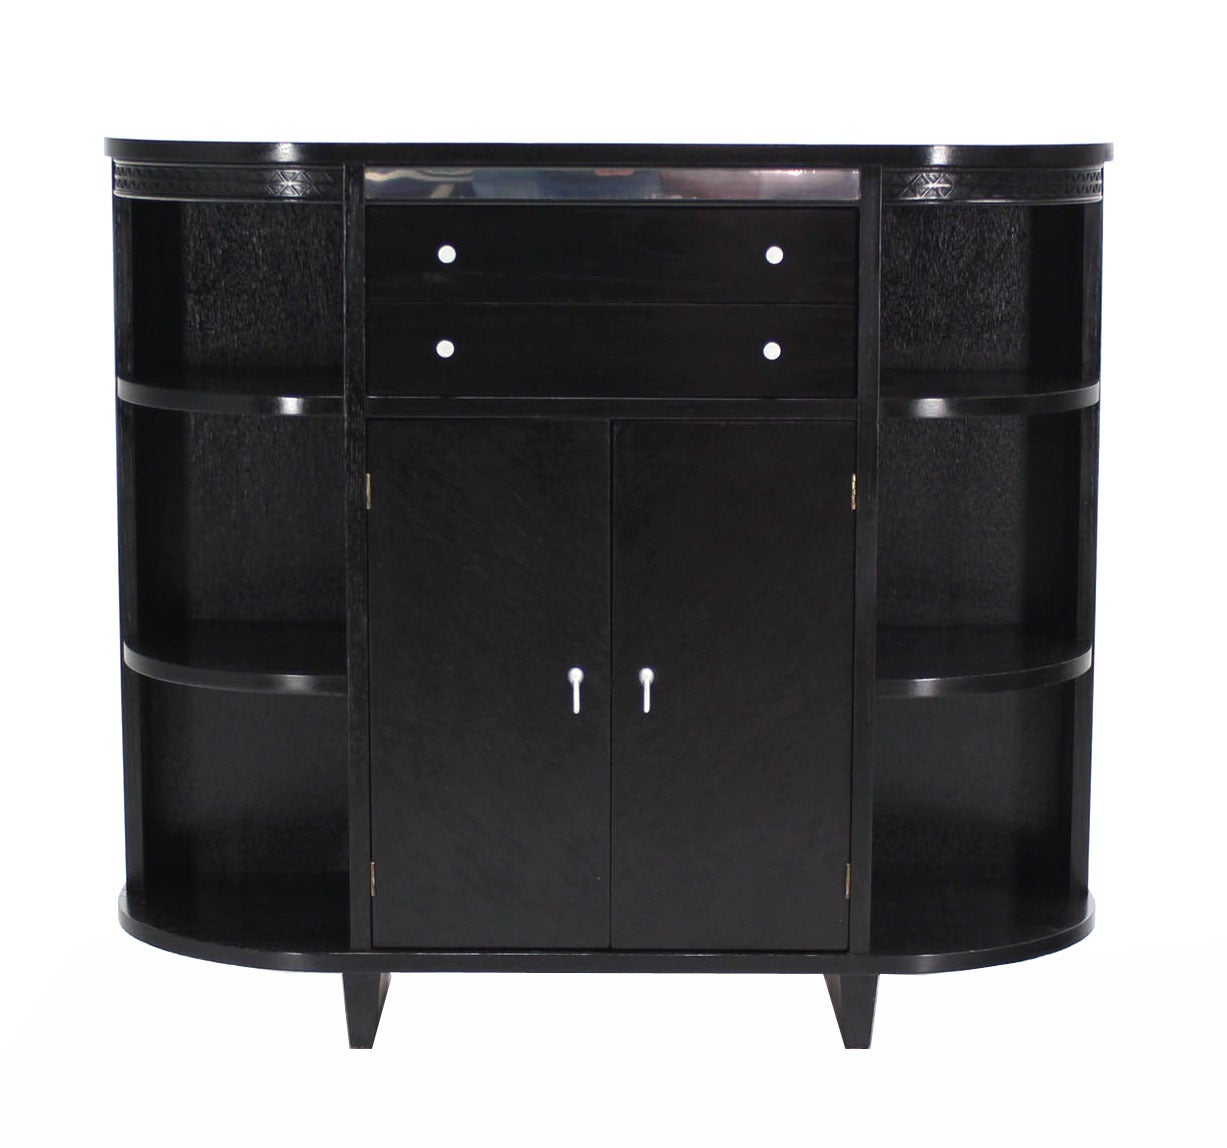 20th Century Black Lacquer Server Cabinet or Credenza with Shelf